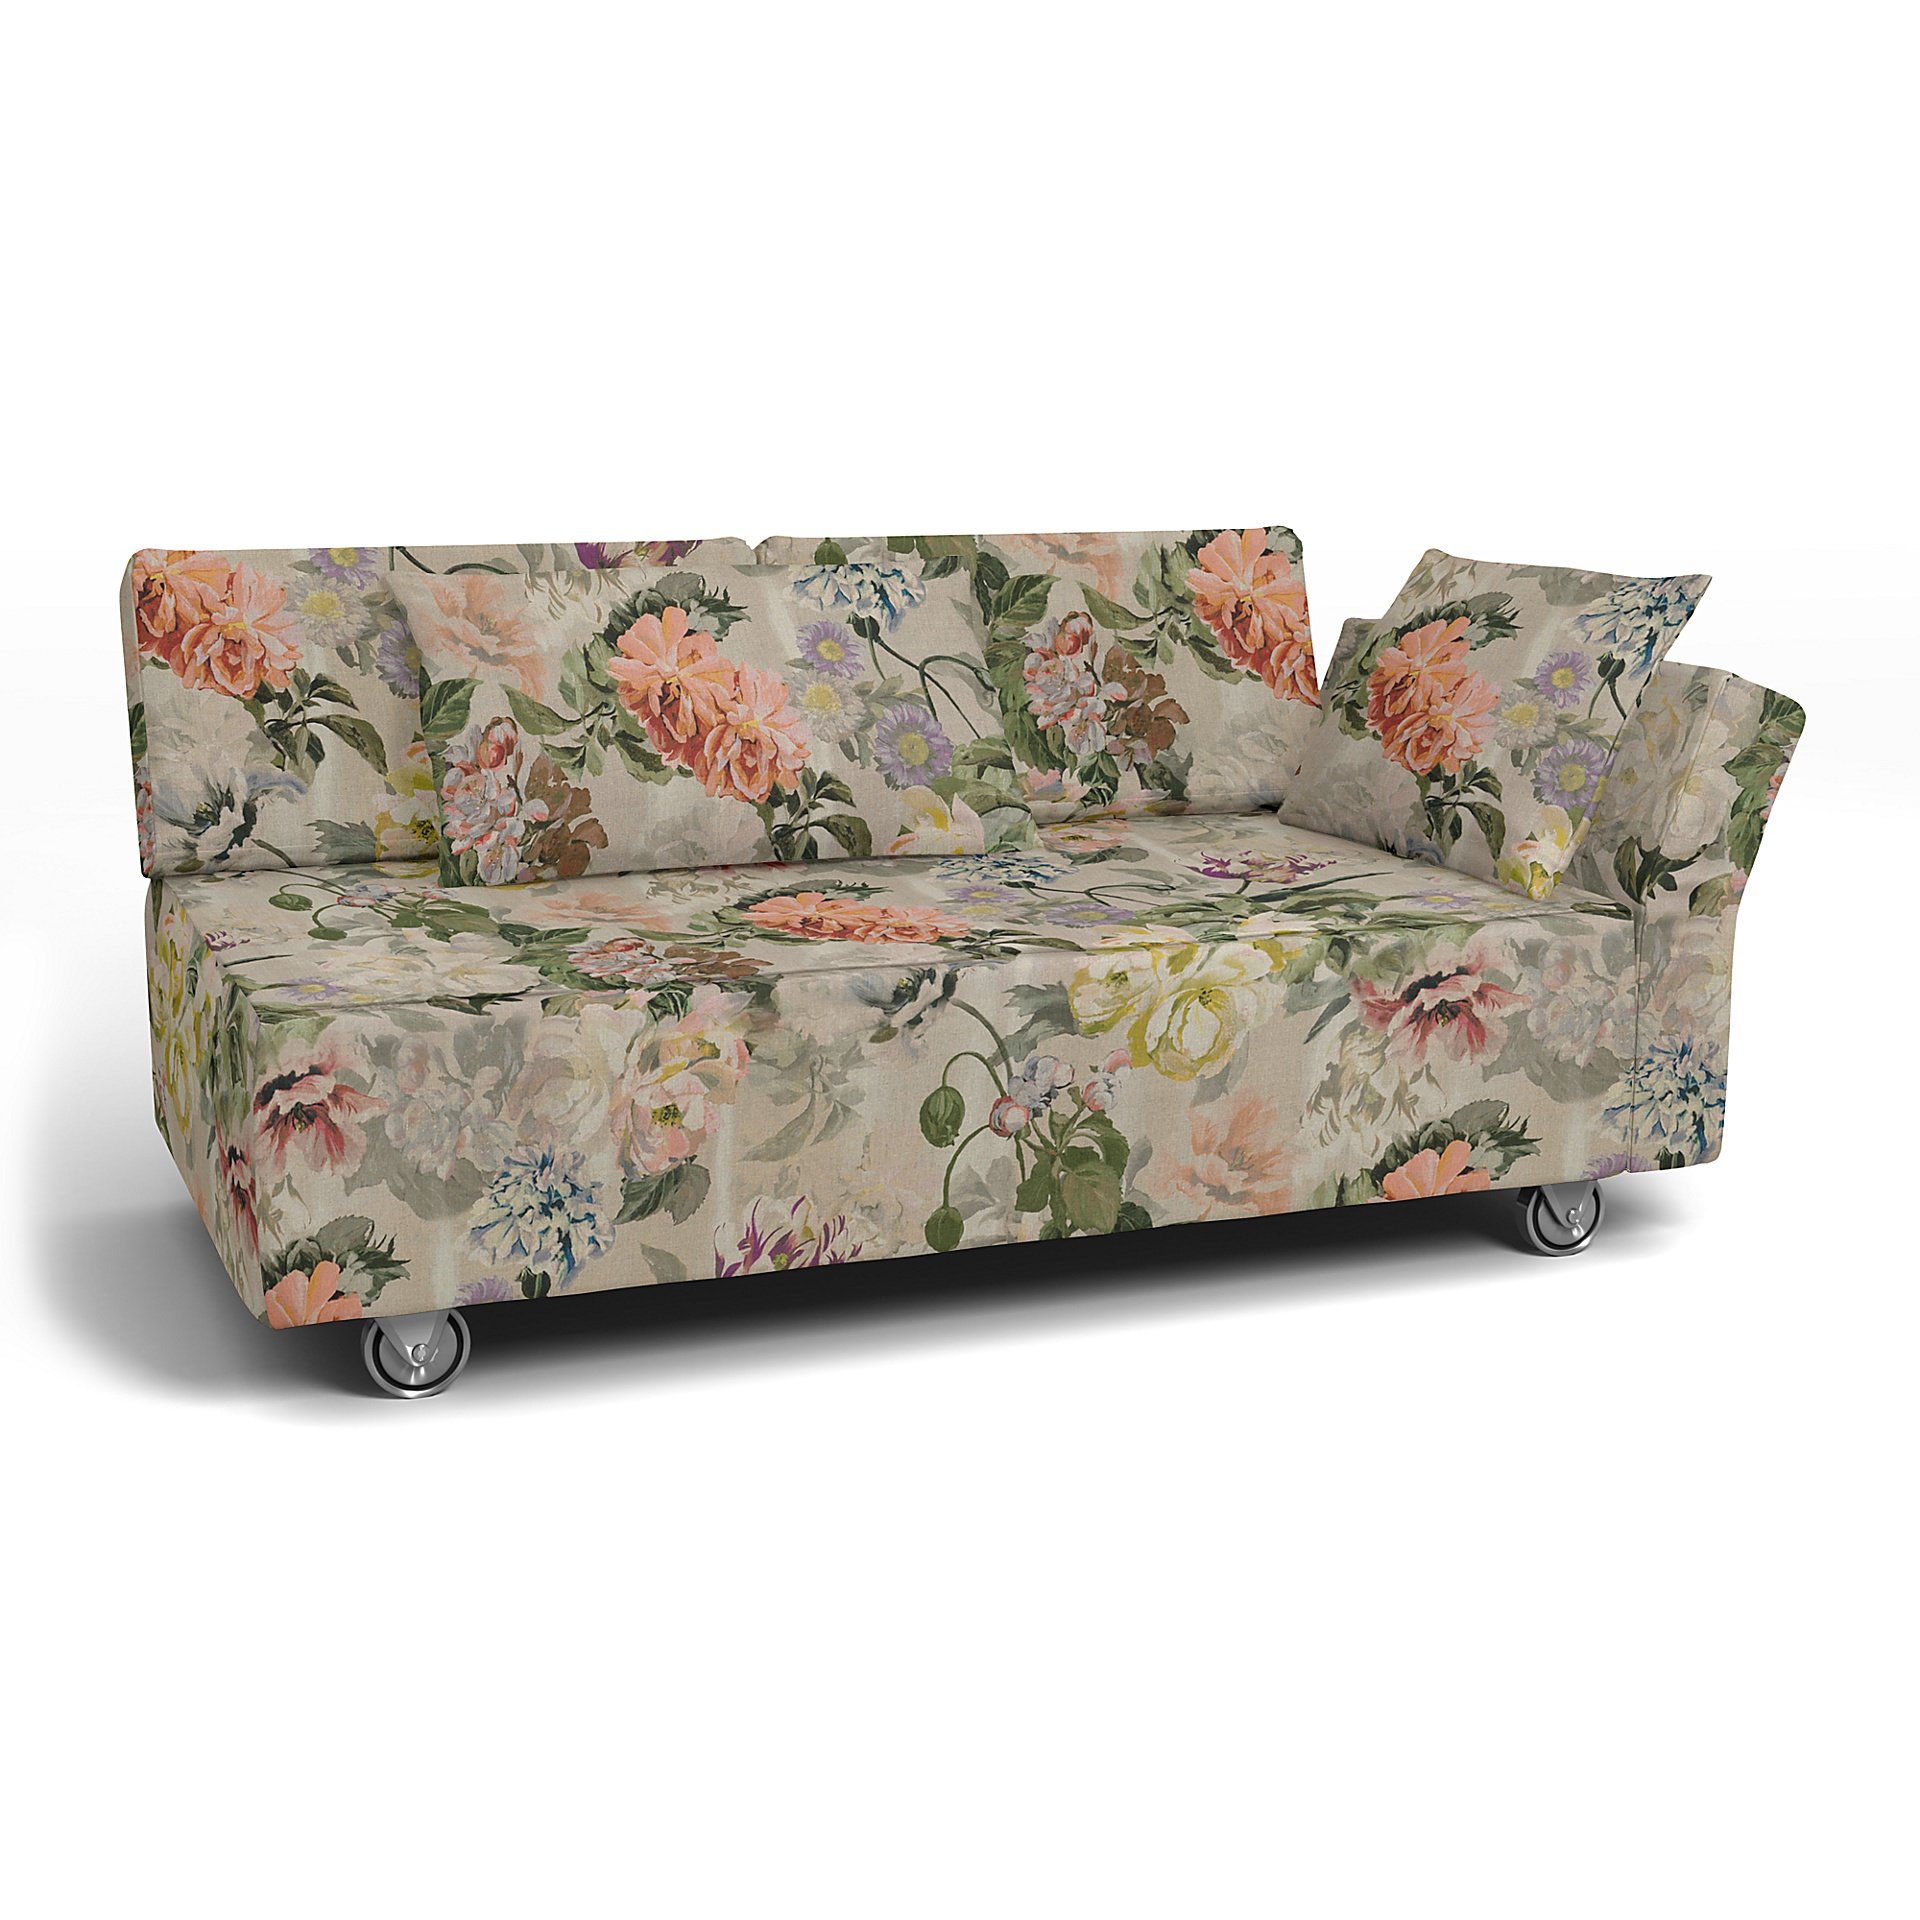 IKEA - Falsterbo 2 Seat Sofa with Right Arm Cover, Delft Flower - Tuberose, Linen - Bemz